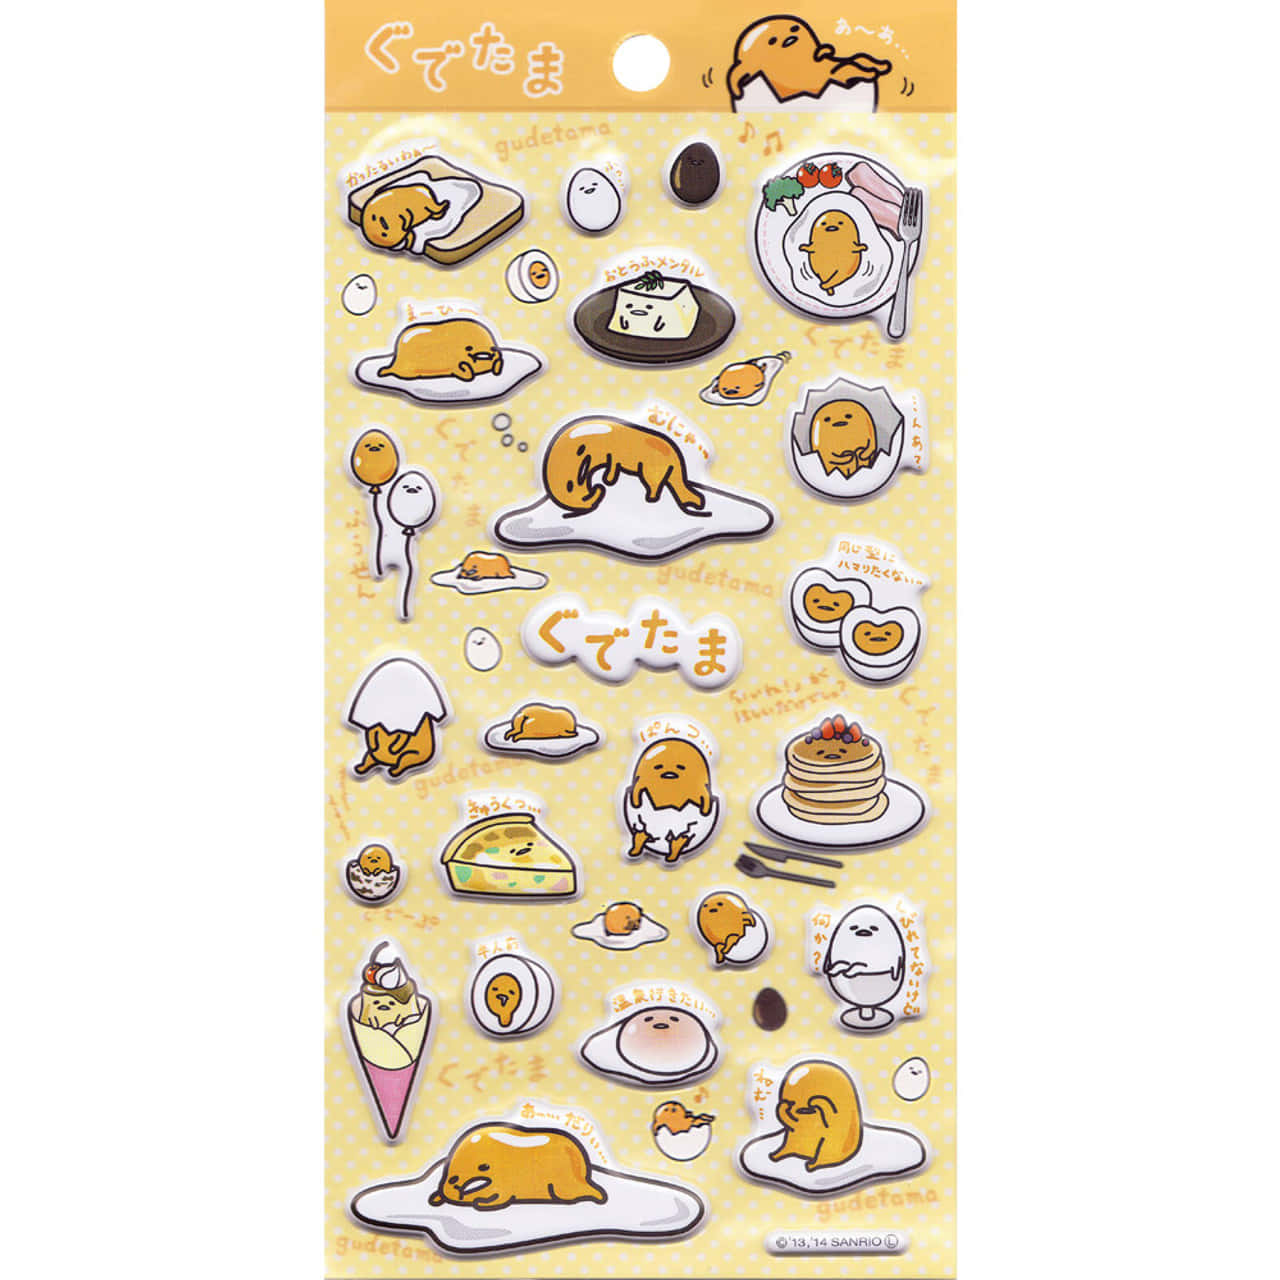 A new way to show your love of Gudetama